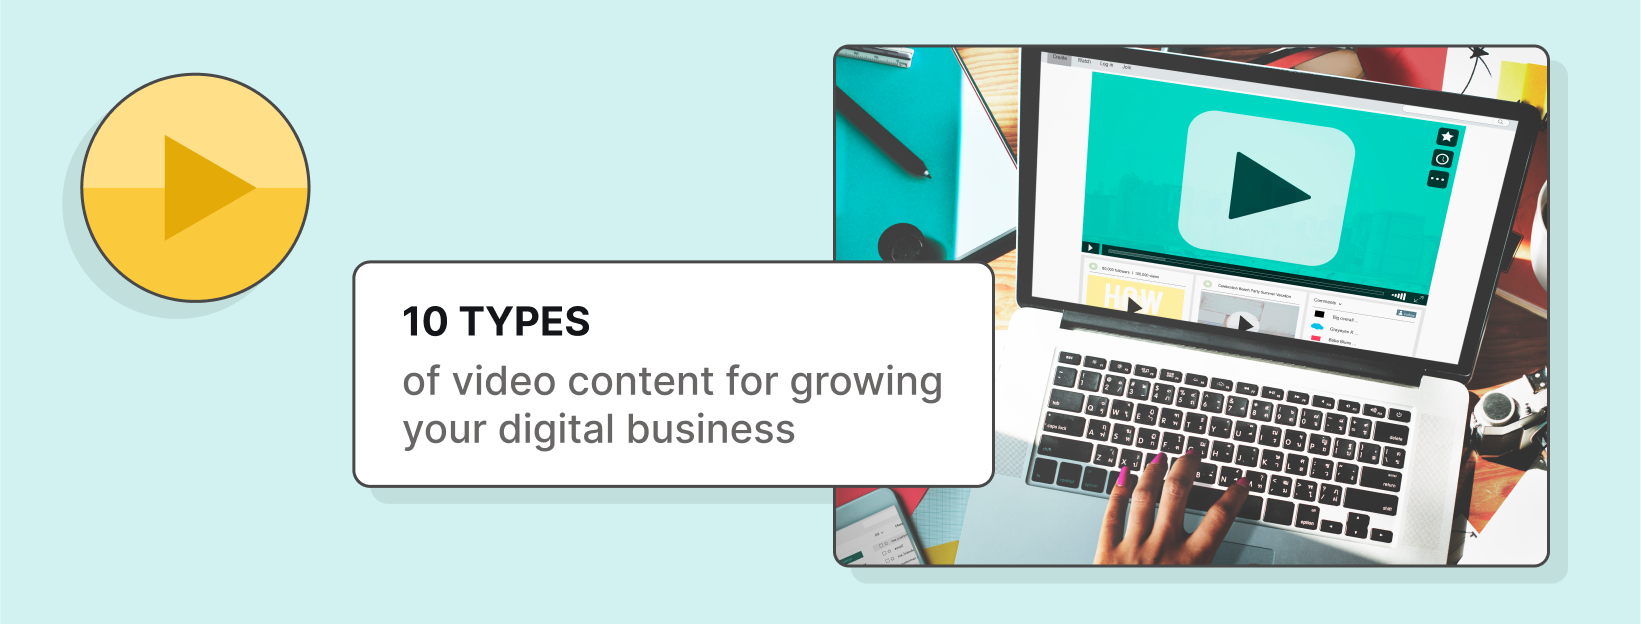 Discover 10 types of video content for growing your digital business